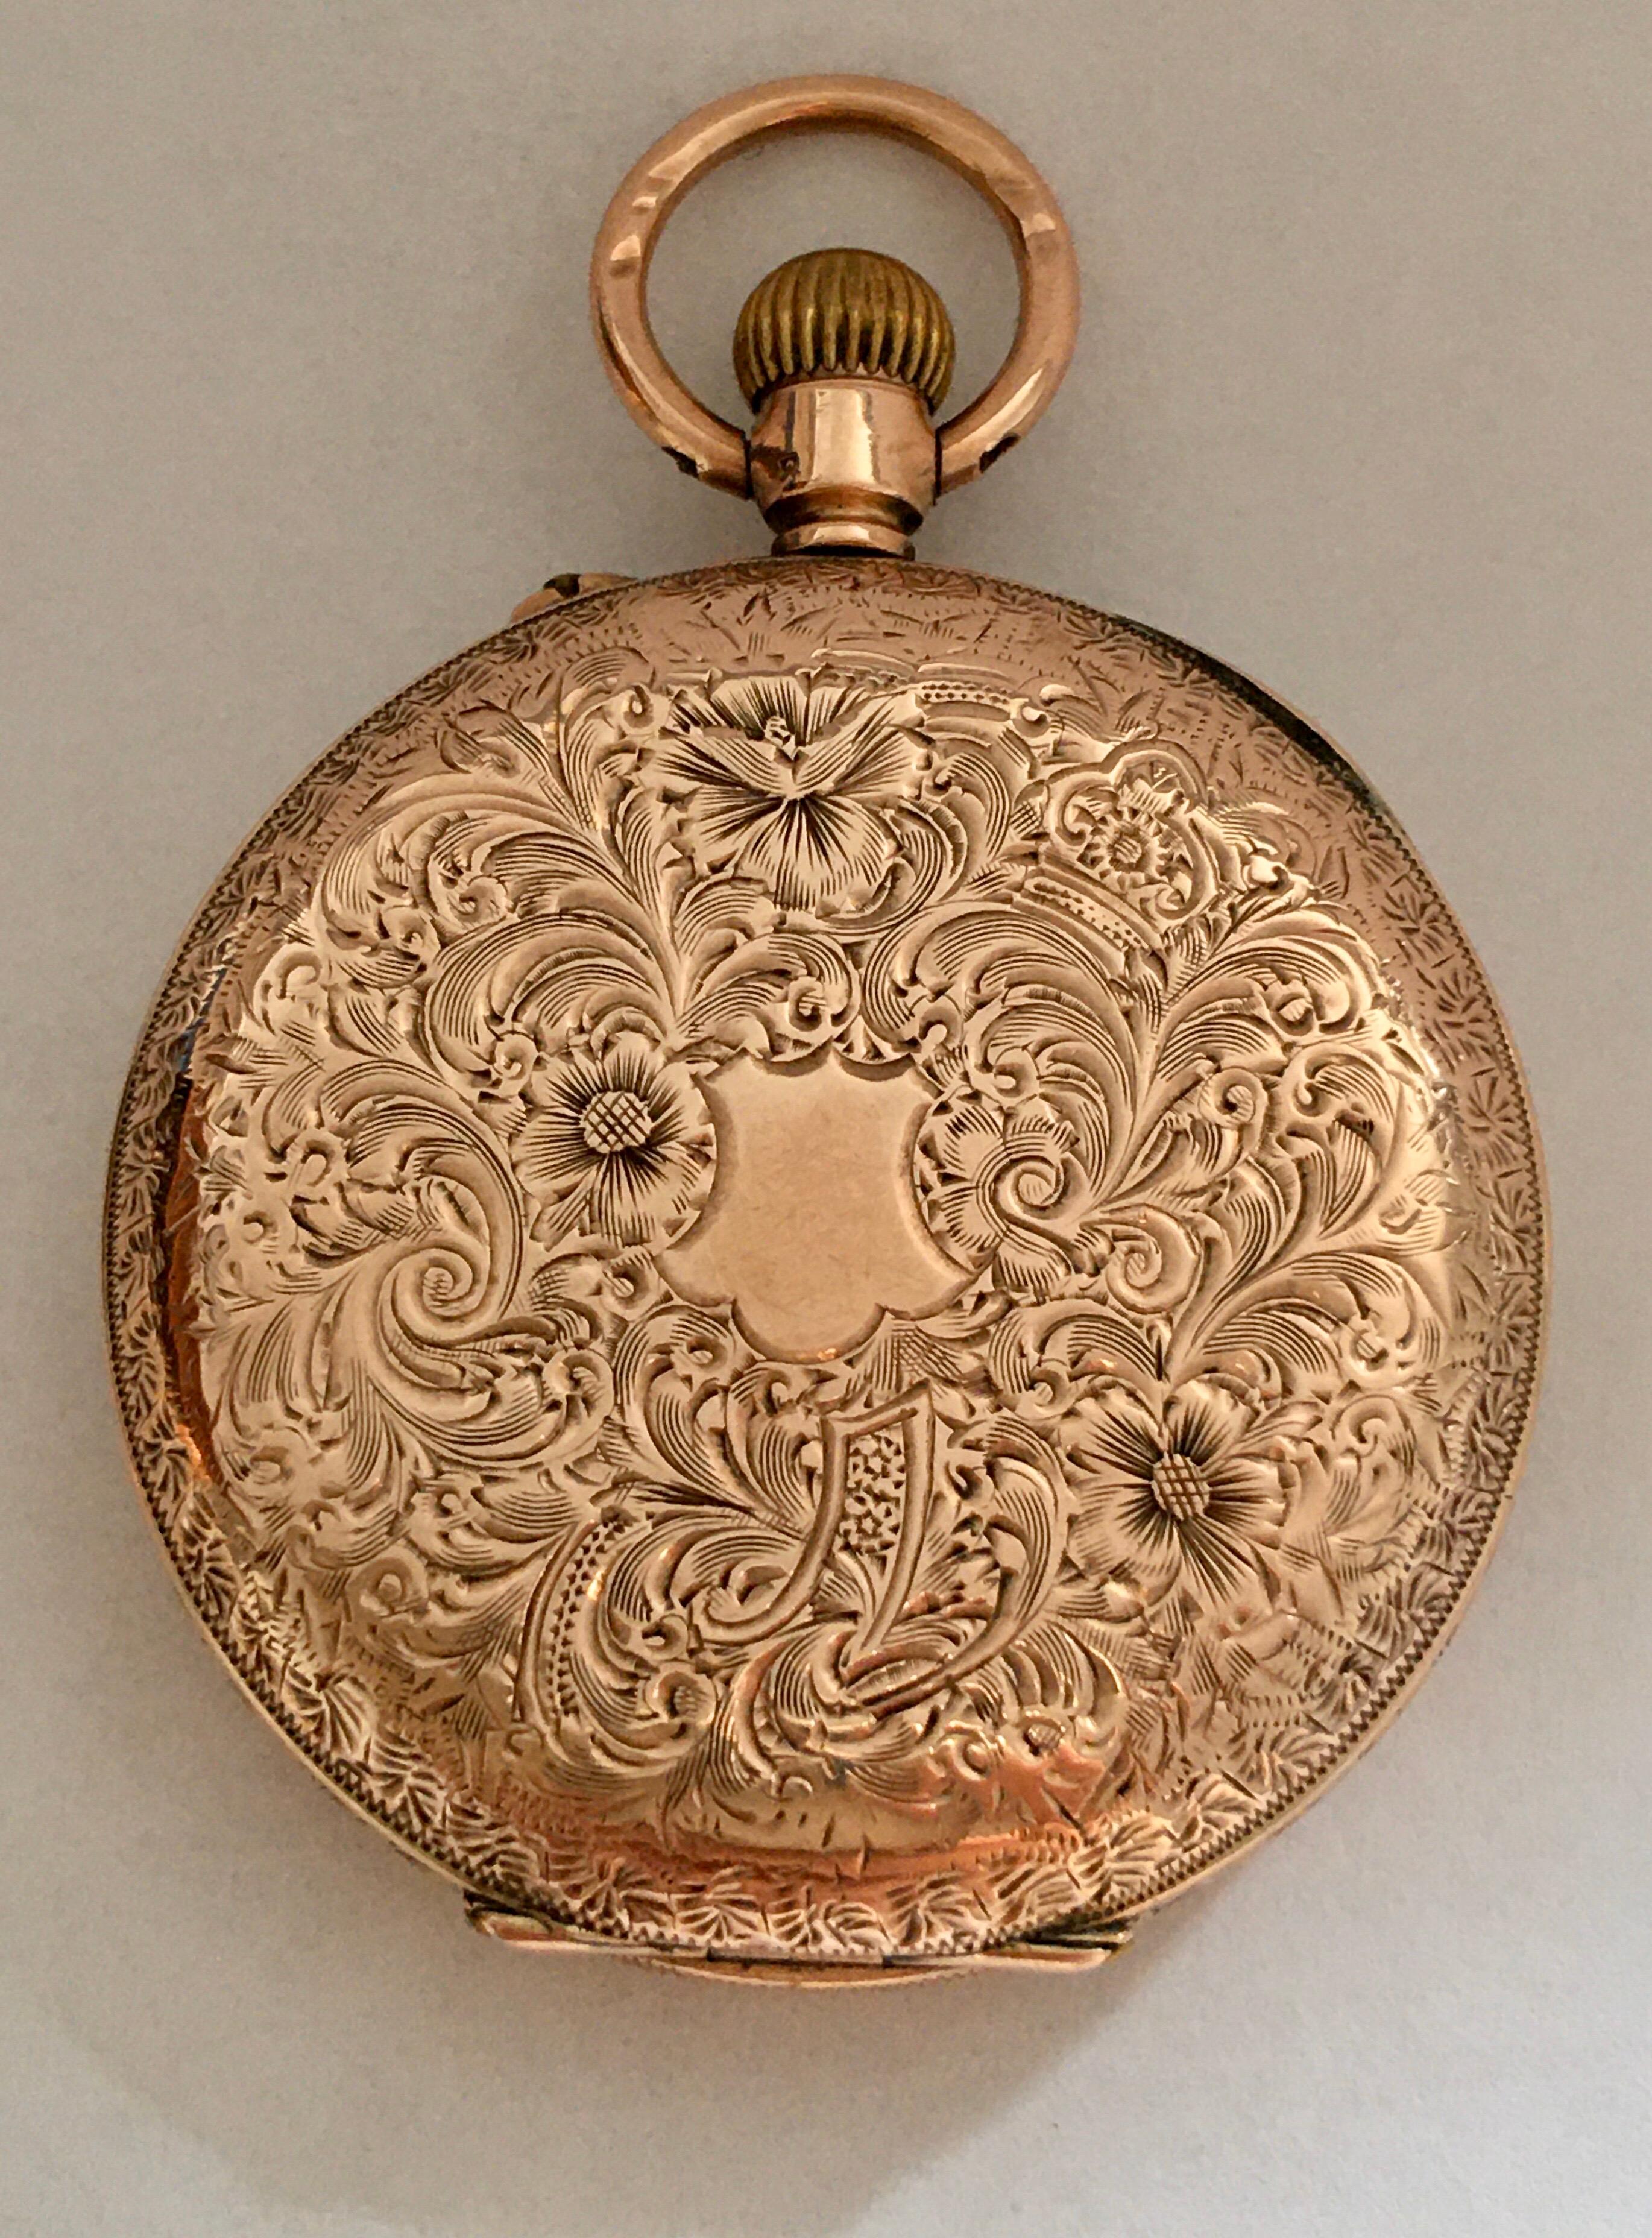 This beautiful 33mm diameter antique gold watch is working and ticking well. Visible signs of ageing and wear with light and tiny scratches on the glass as shown. This watch weighed 26.0 grams

Please study the images carefully as form part of the